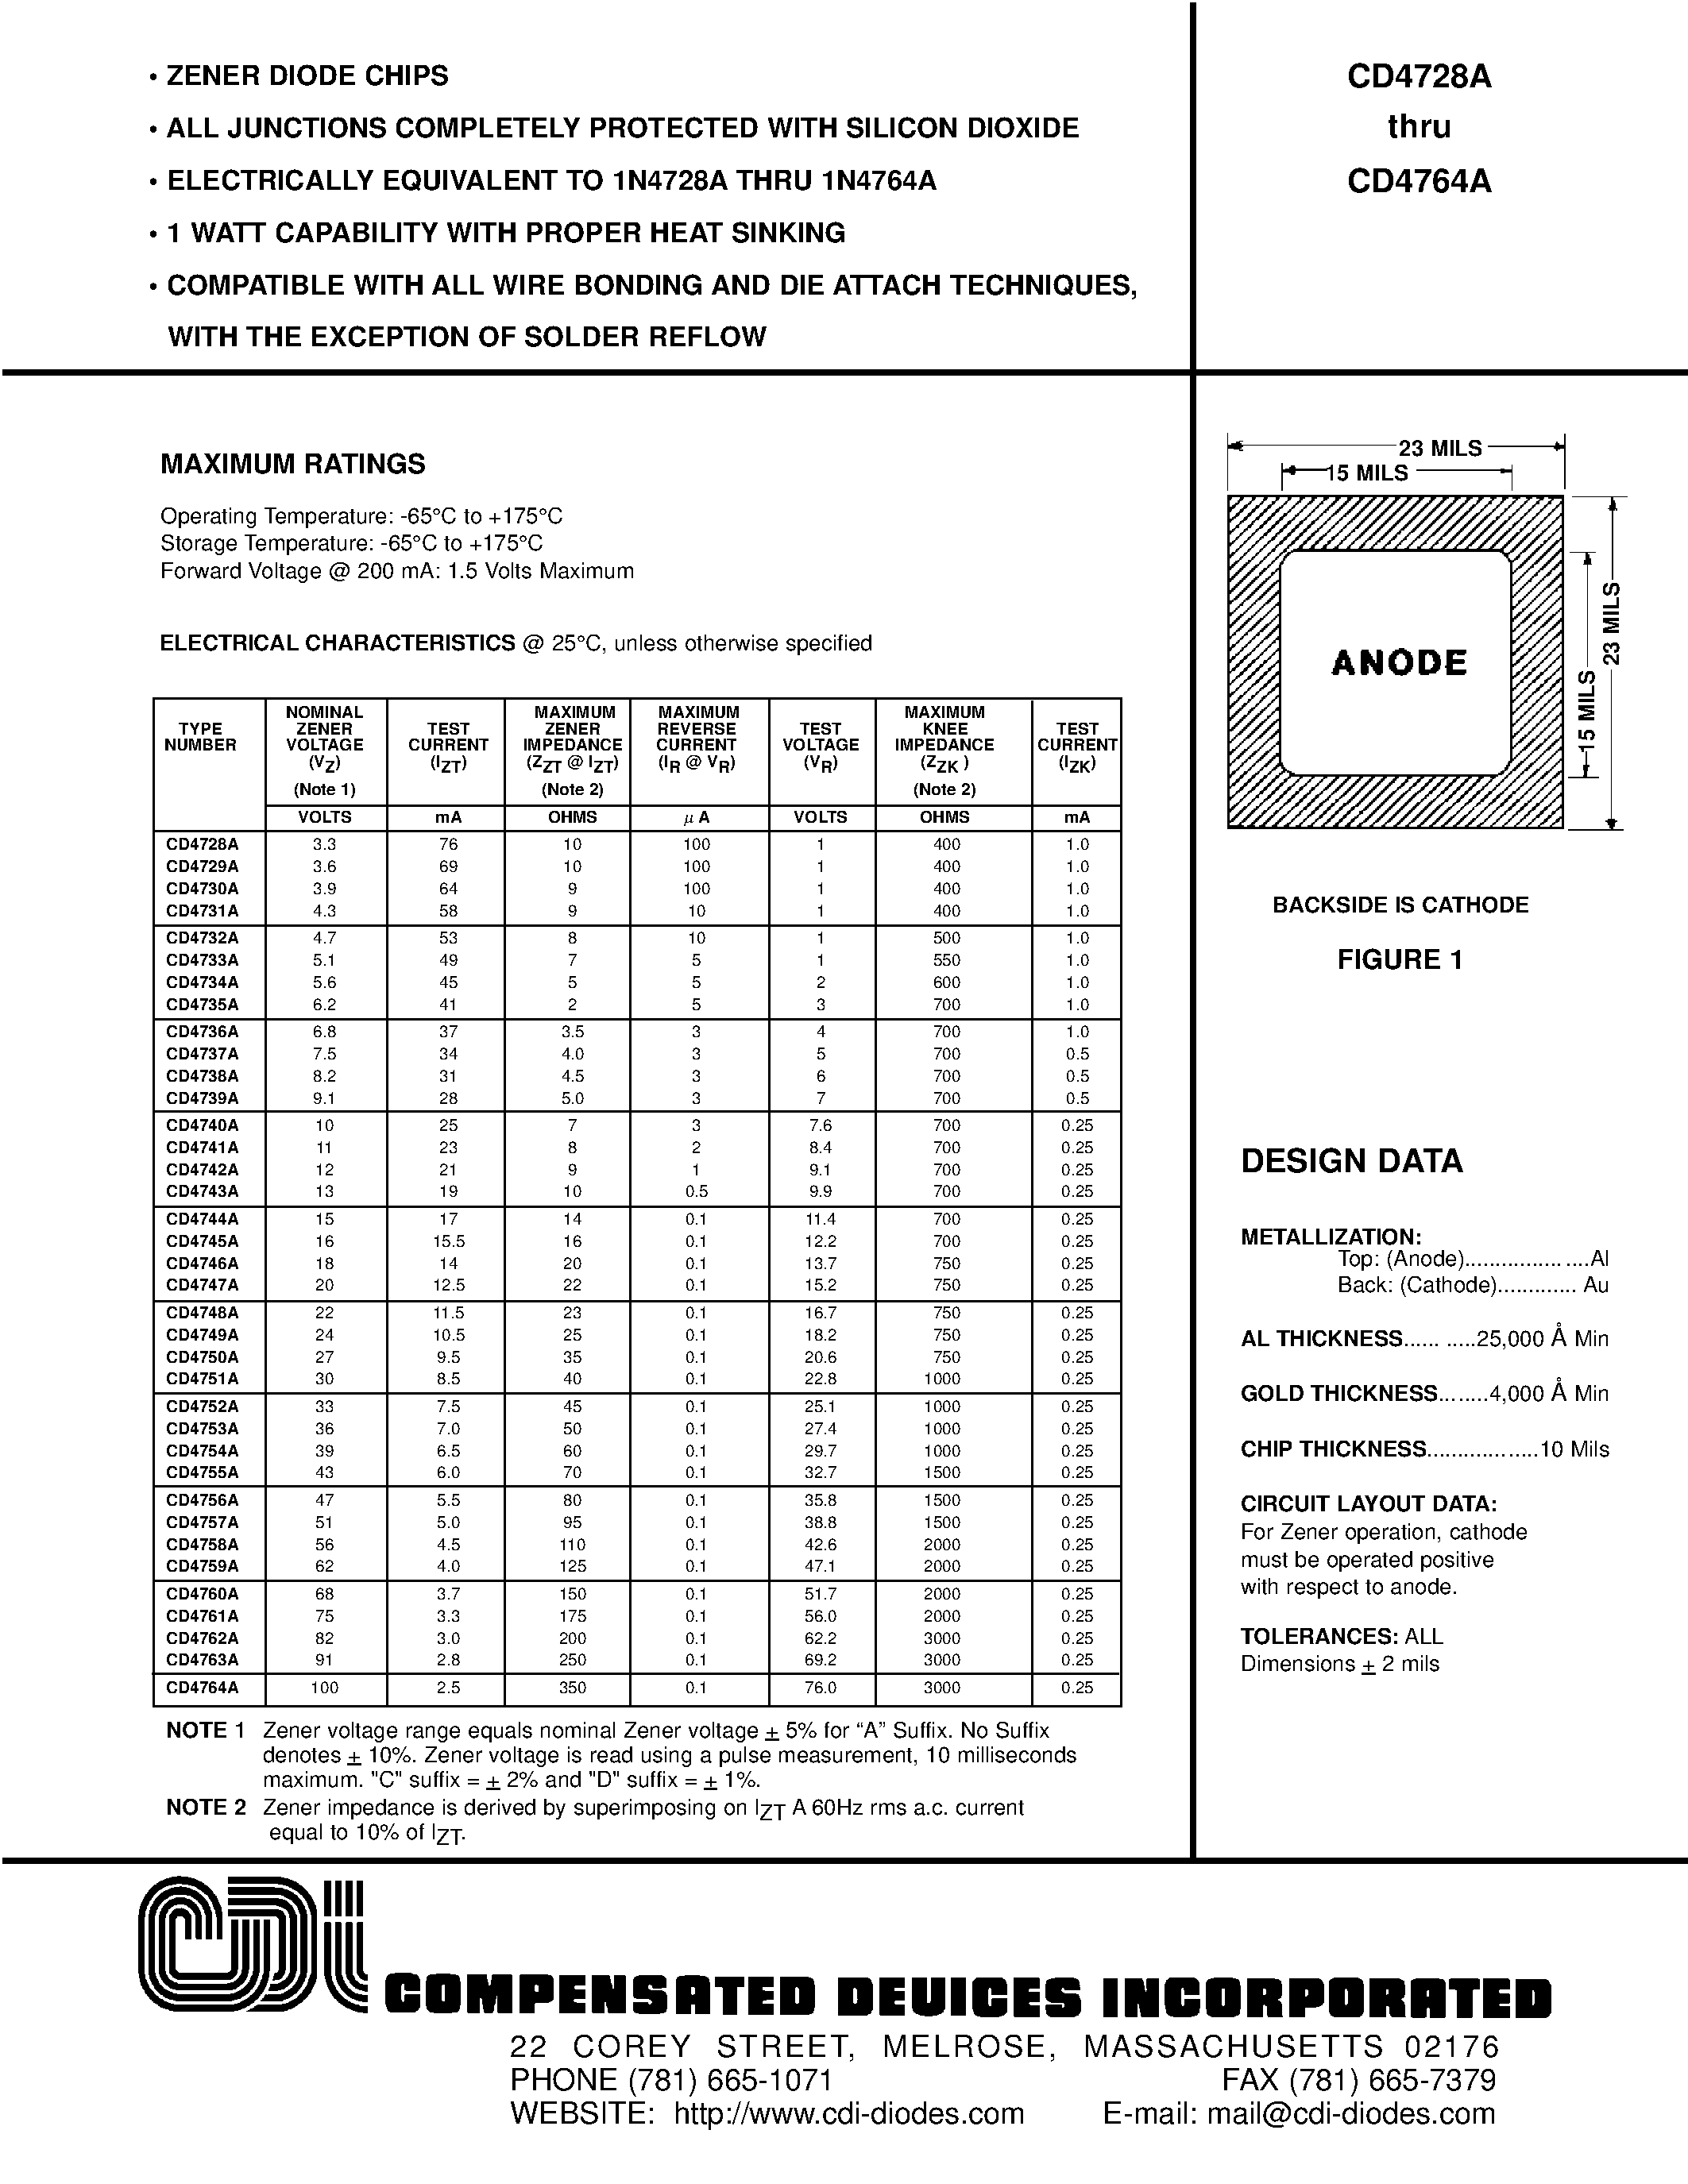 Datasheet CD4750A - ZENER DIODE CHIPS page 1